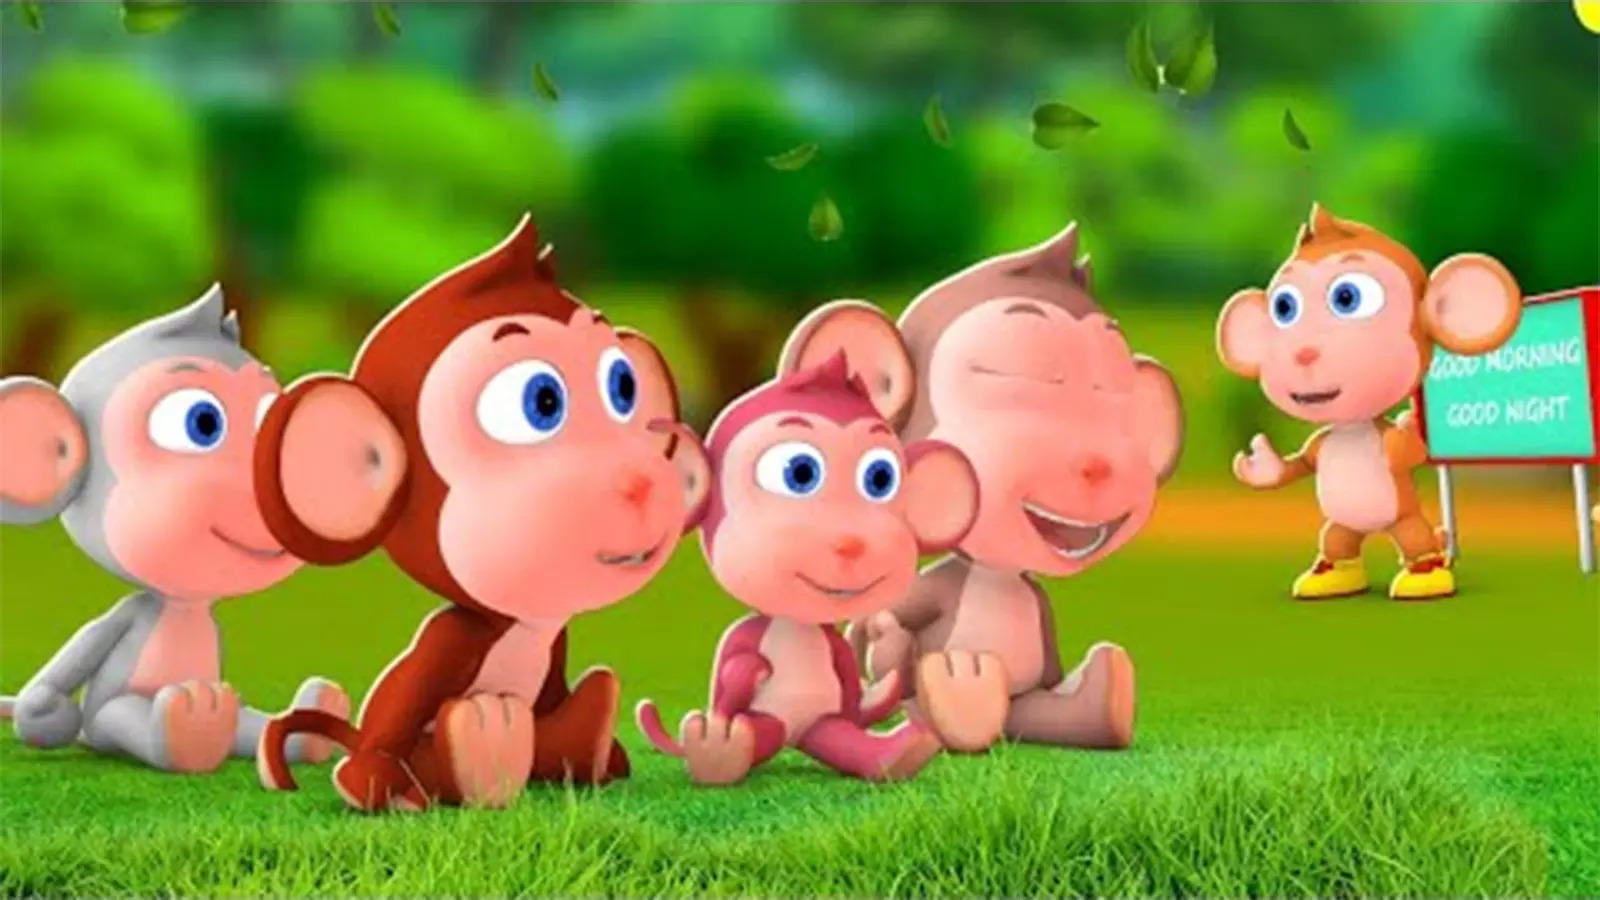 Watch Latest Children Hindi Story 'Five Little Monkeys' For Kids - Check  Out Kids's Nursery Rhymes And Baby Songs In Hindi | Entertainment - Times  of India Videos